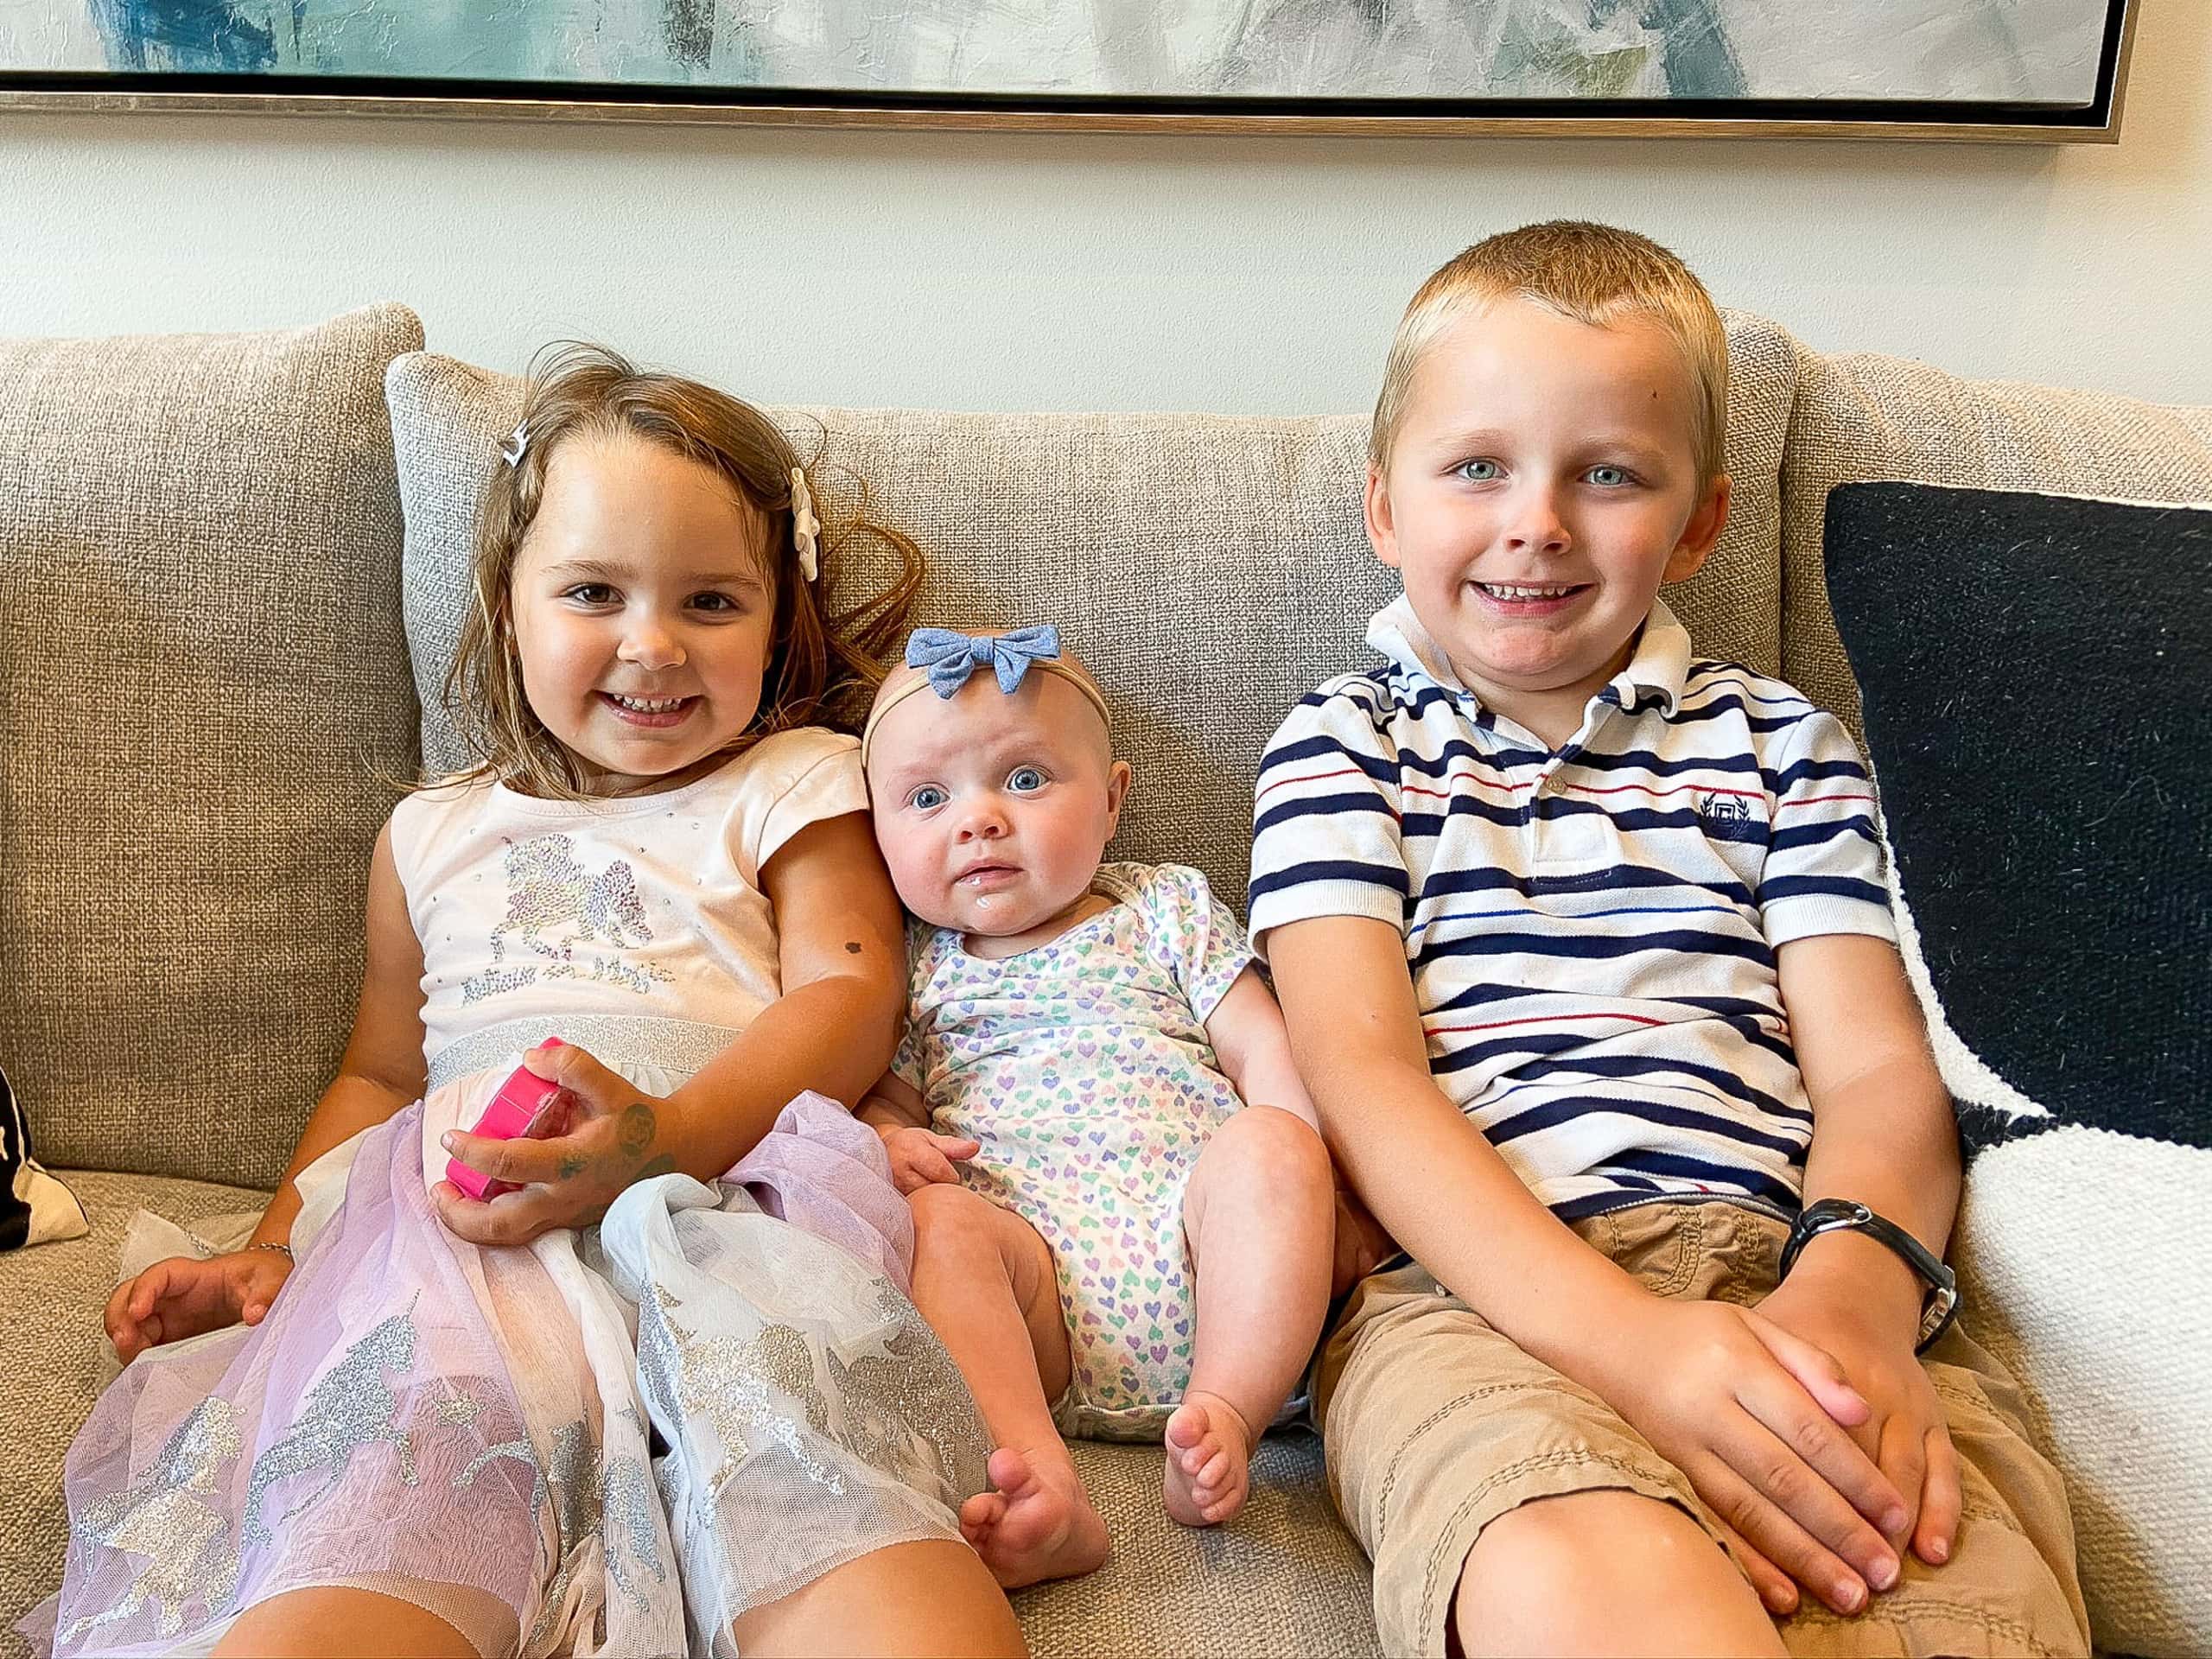 Rory and her cousins